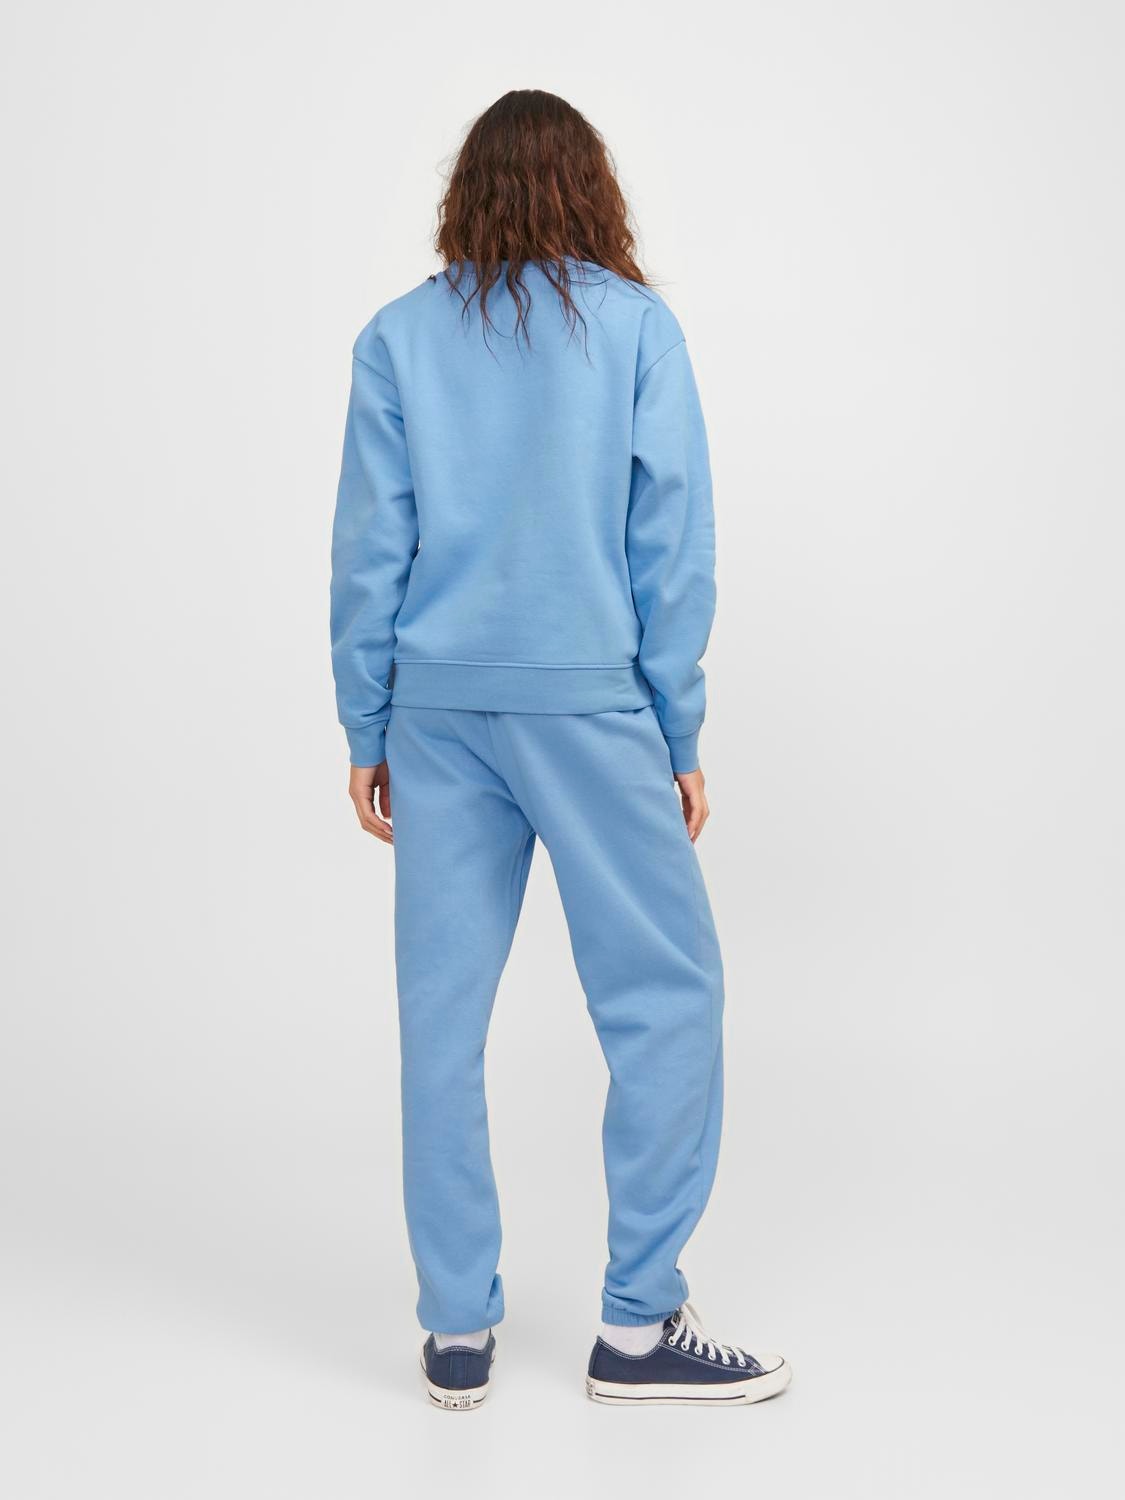 JJXX Παντελόνι Relaxed Fit Φόρμα -Silver Lake Blue - 12223960